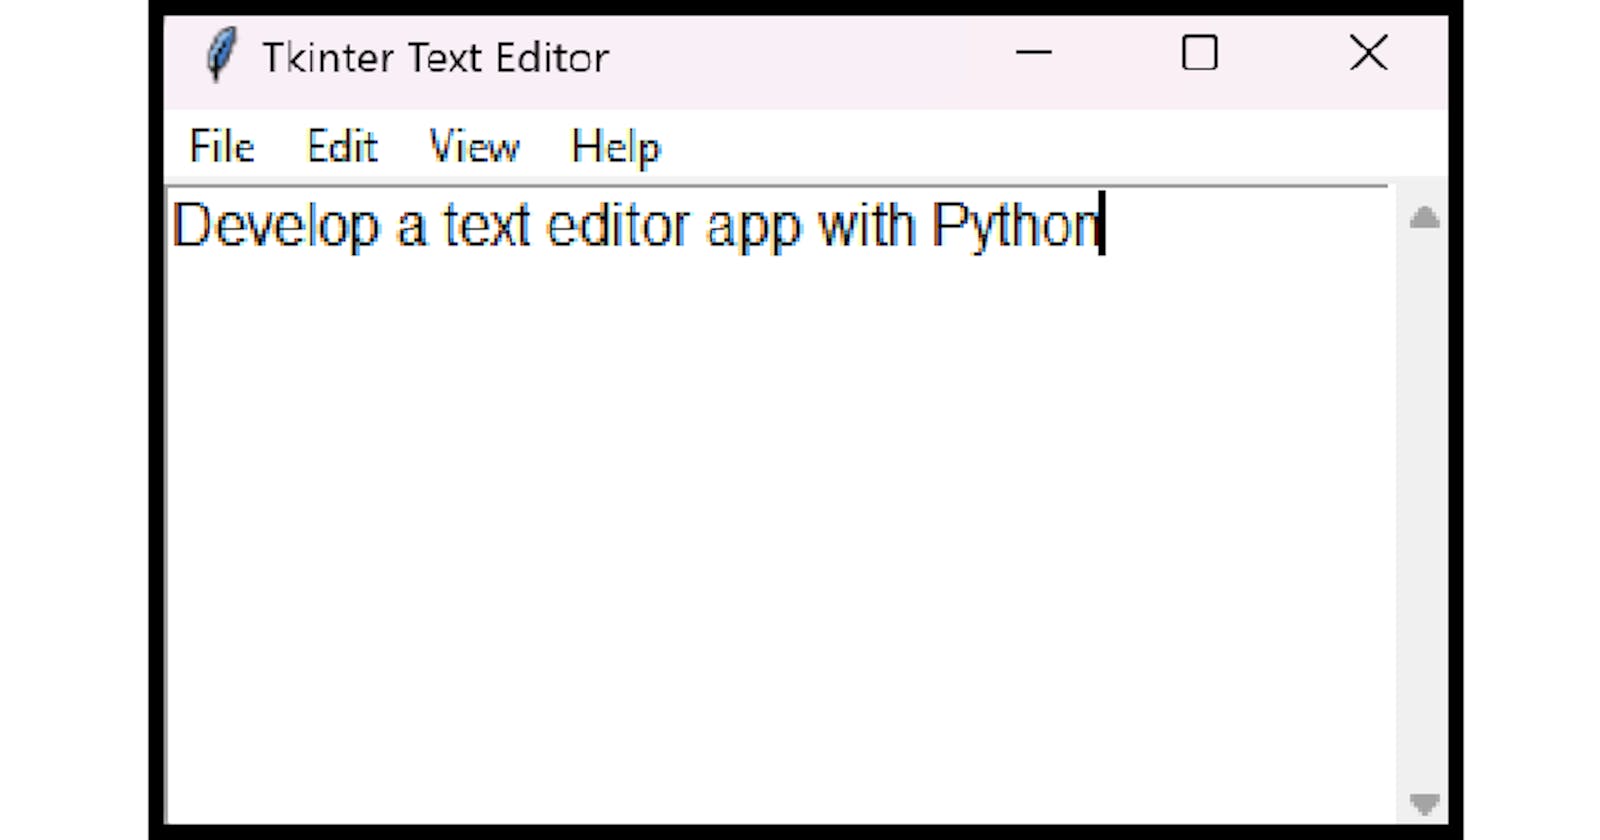 Develop a text editor app with Python